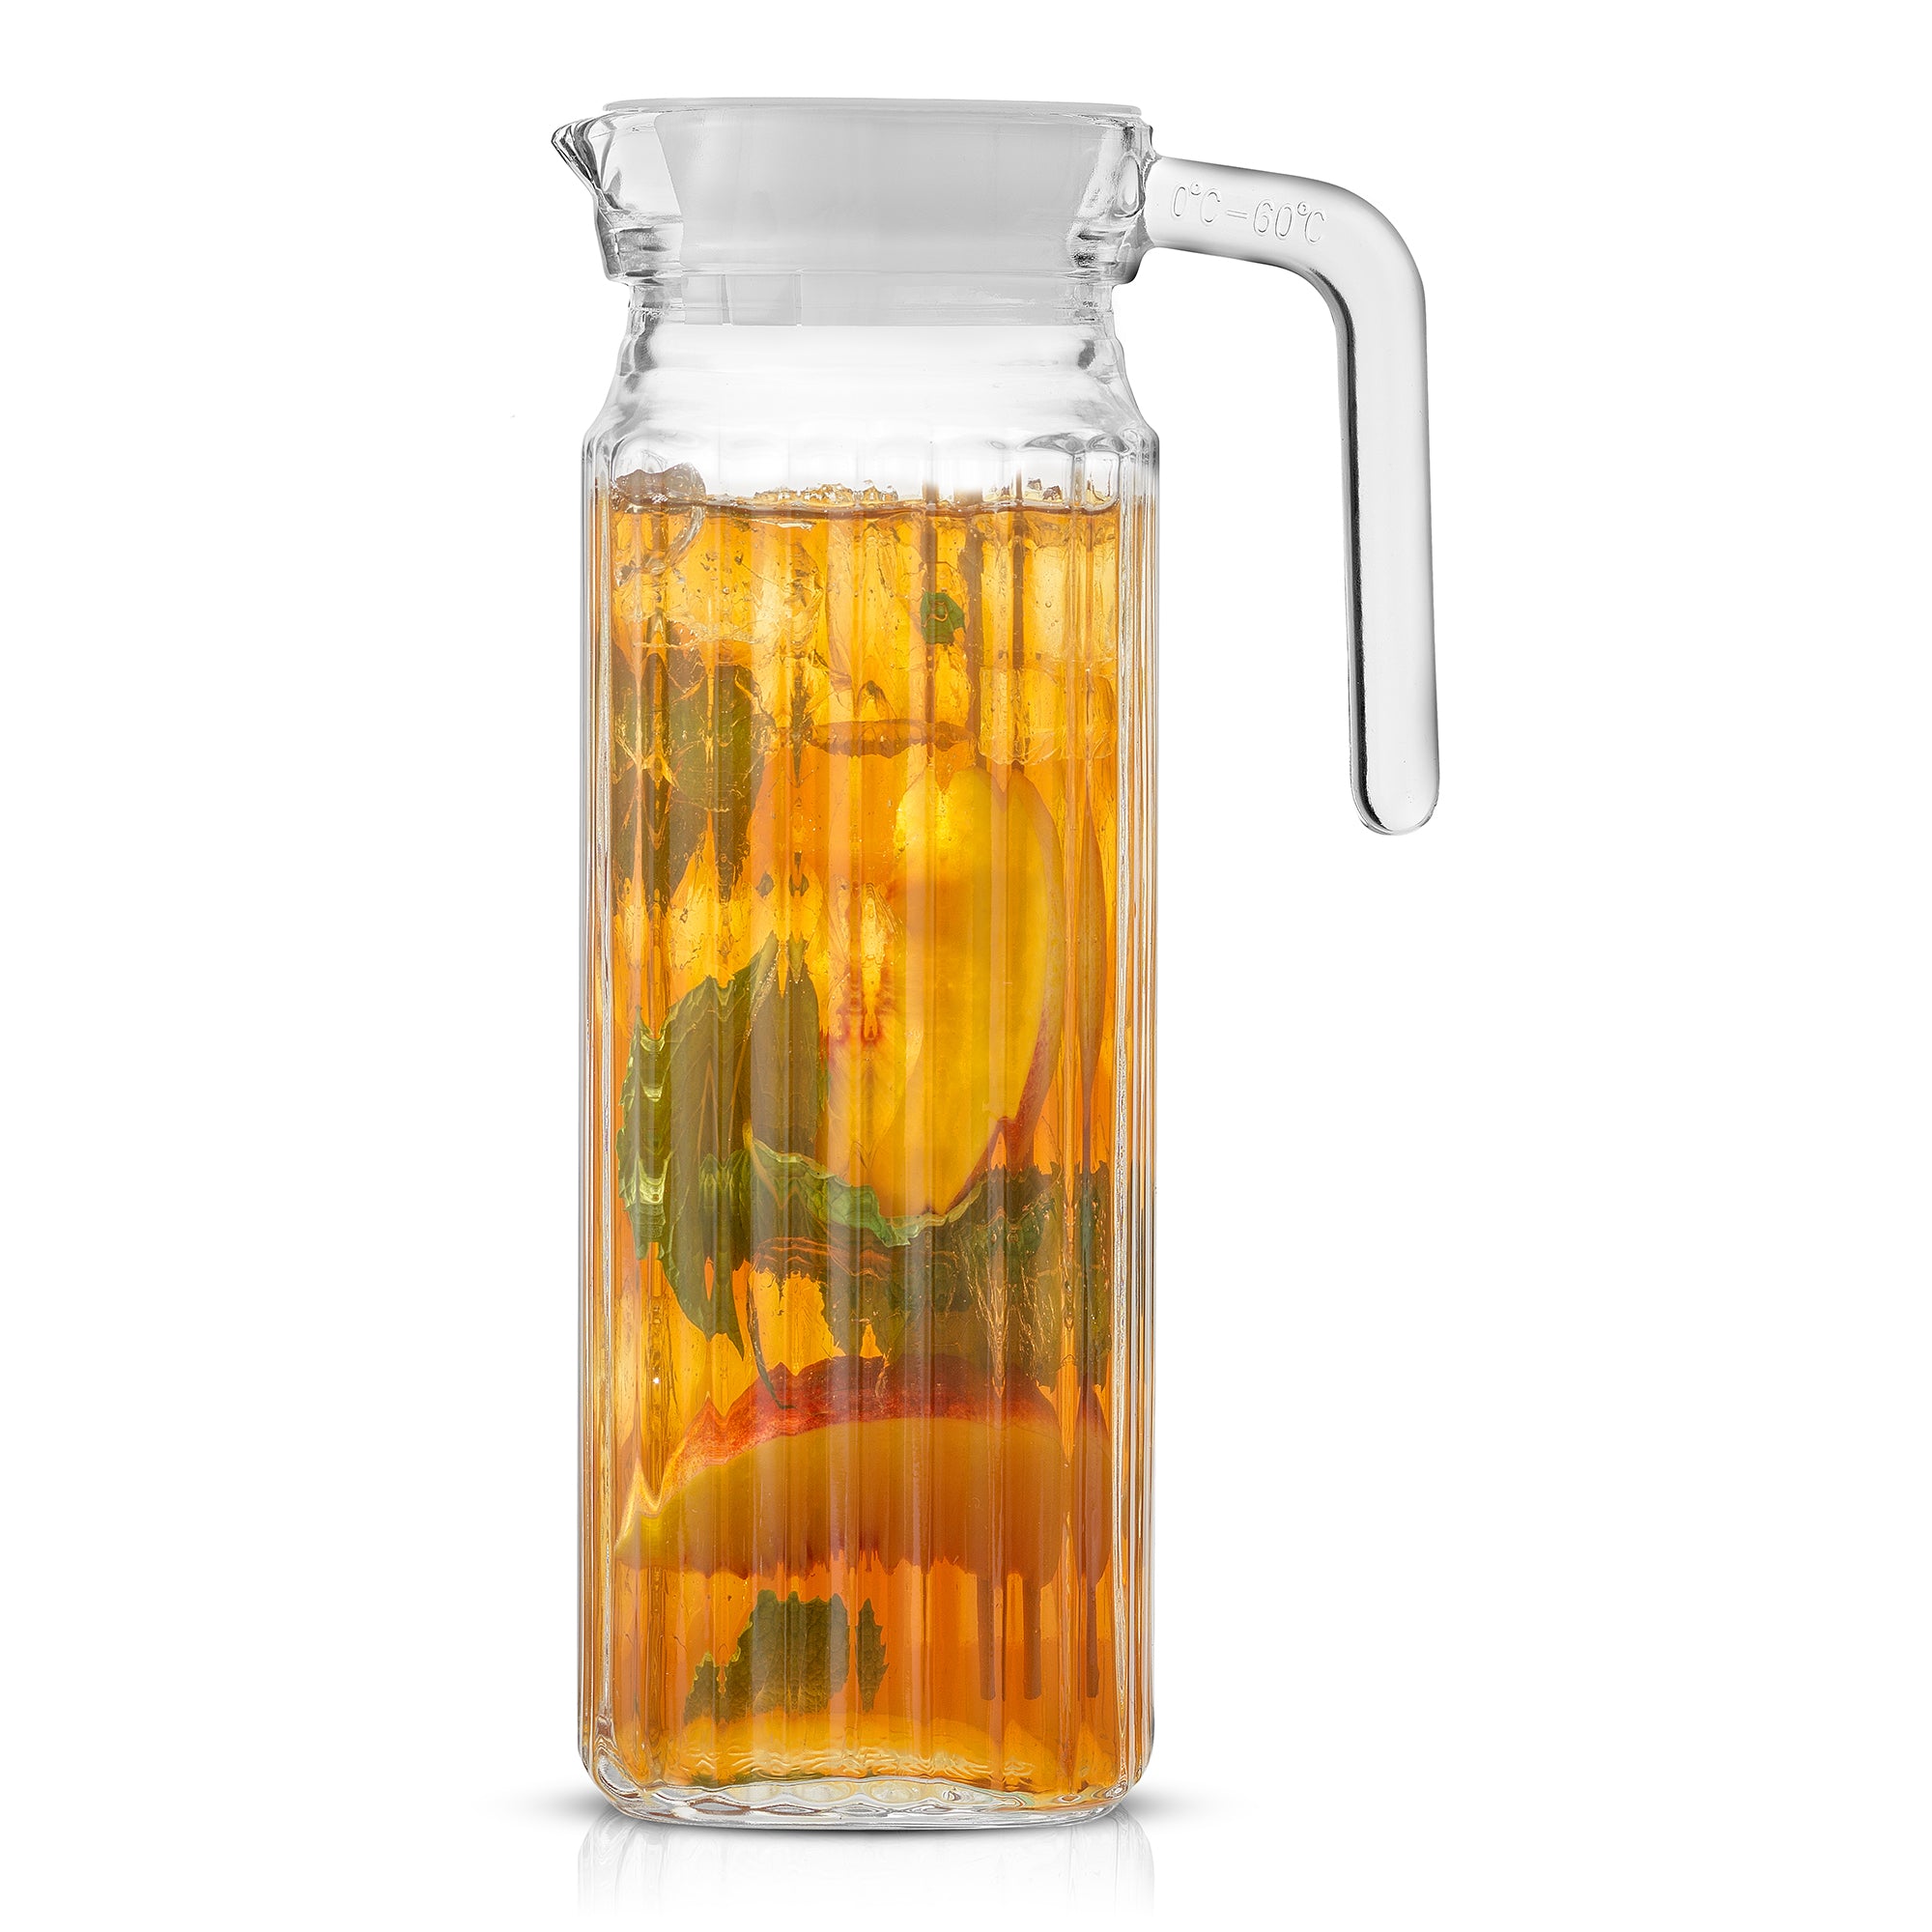 A 40-ounce JoyJolt Beverage Serveware Glass Pitcher filled with iced tea and peach slices sits on a white background. The pitcher has a clear glass body, a white lid, and a handle for easy pouring.